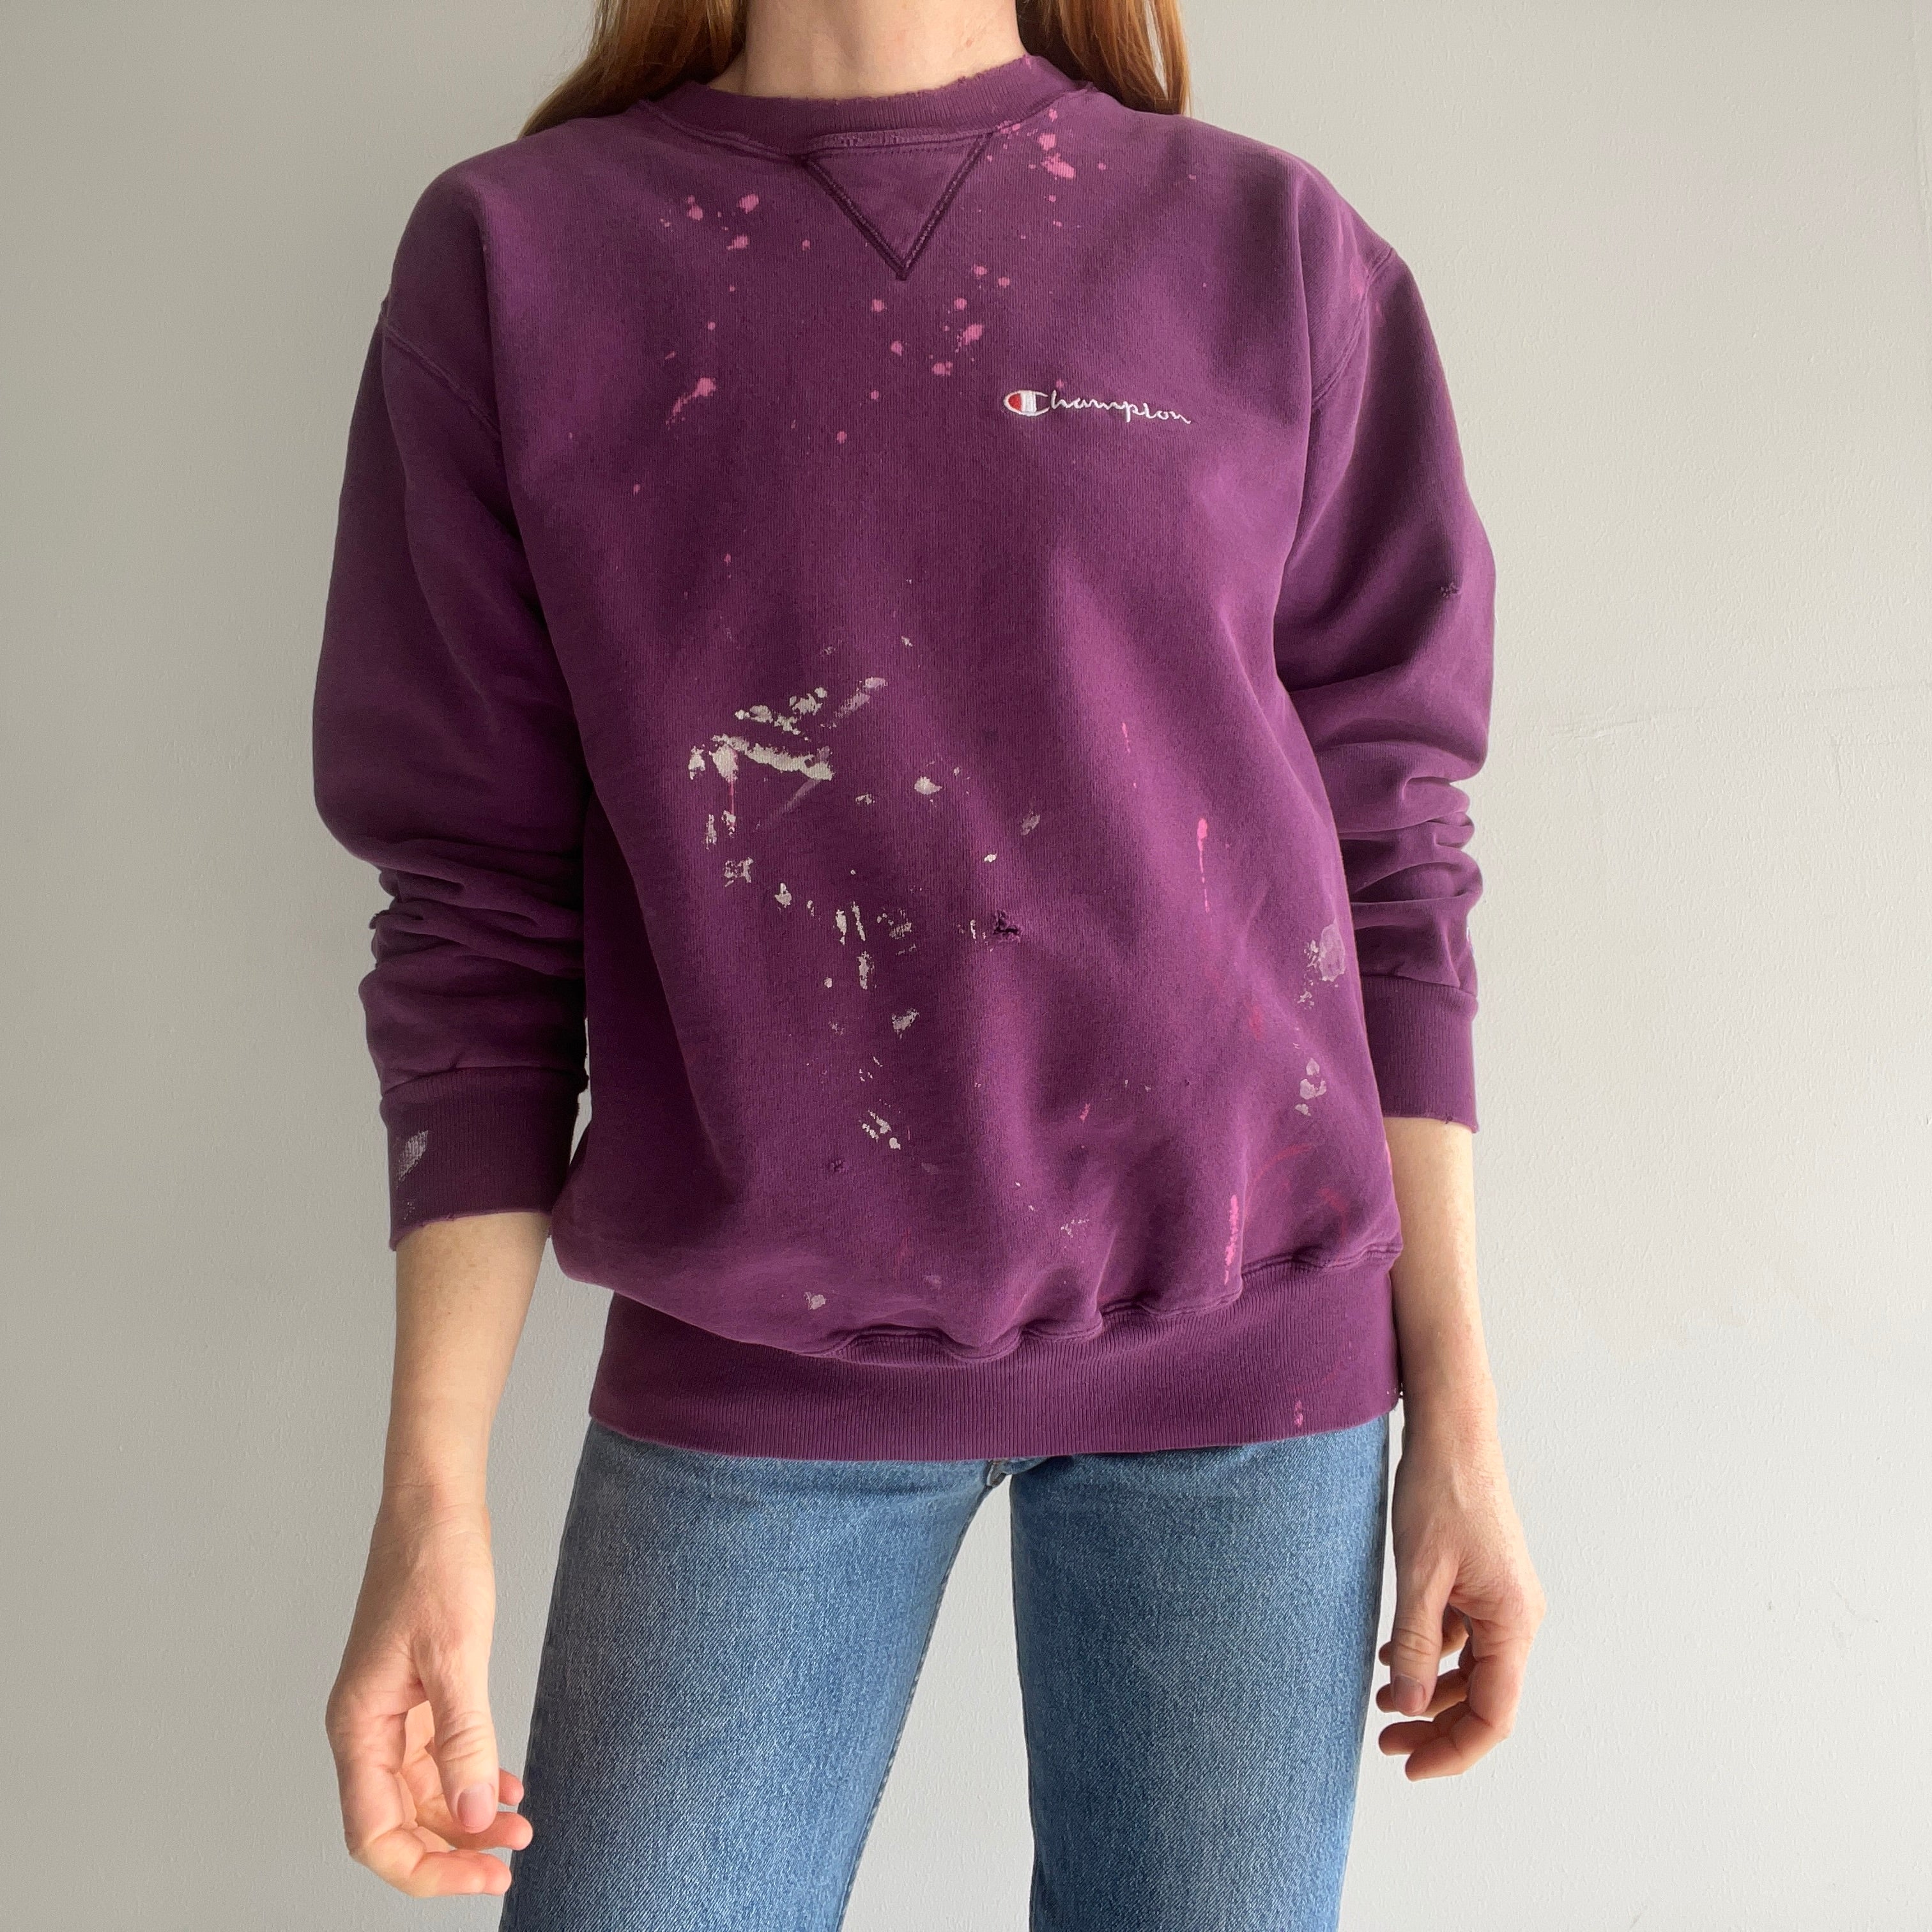 1990s Paint Stained and Thrashed Champion Brand Sweatshirt